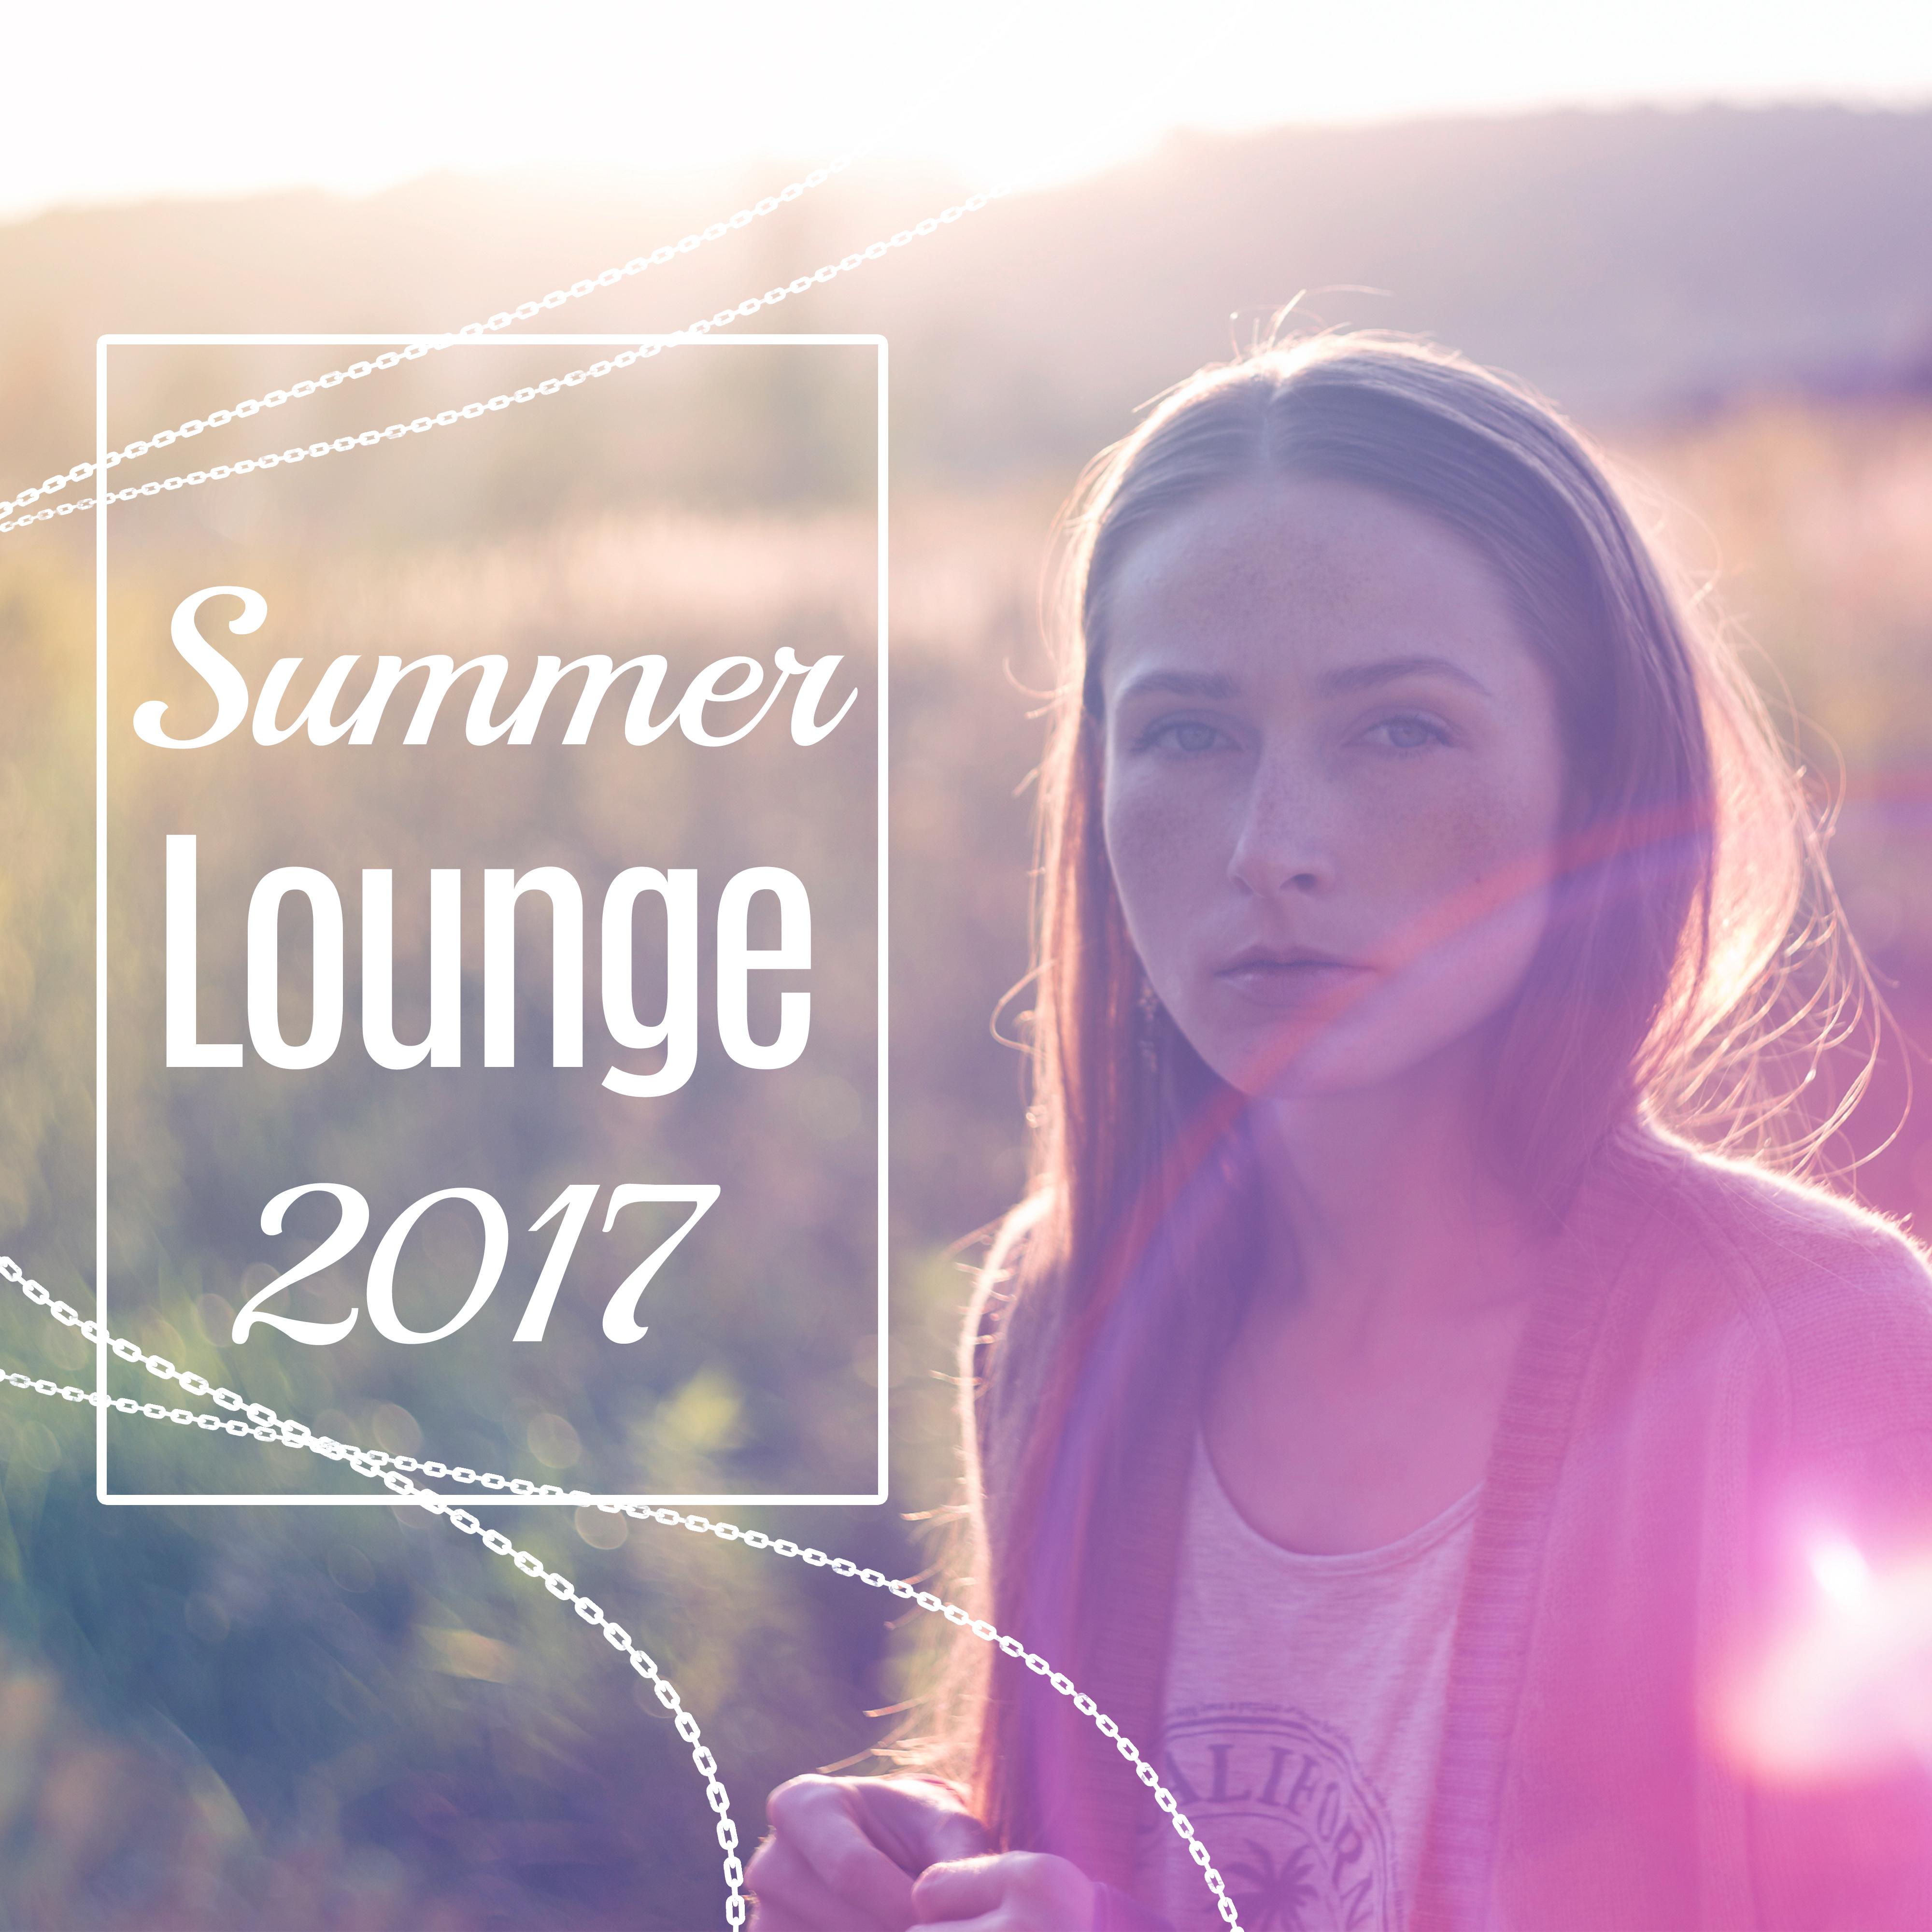 Summer Lounge 2017  Mellow Chillout, Relax, Beach Party, Ambient Music, Beach Chill, Lounge Tunes